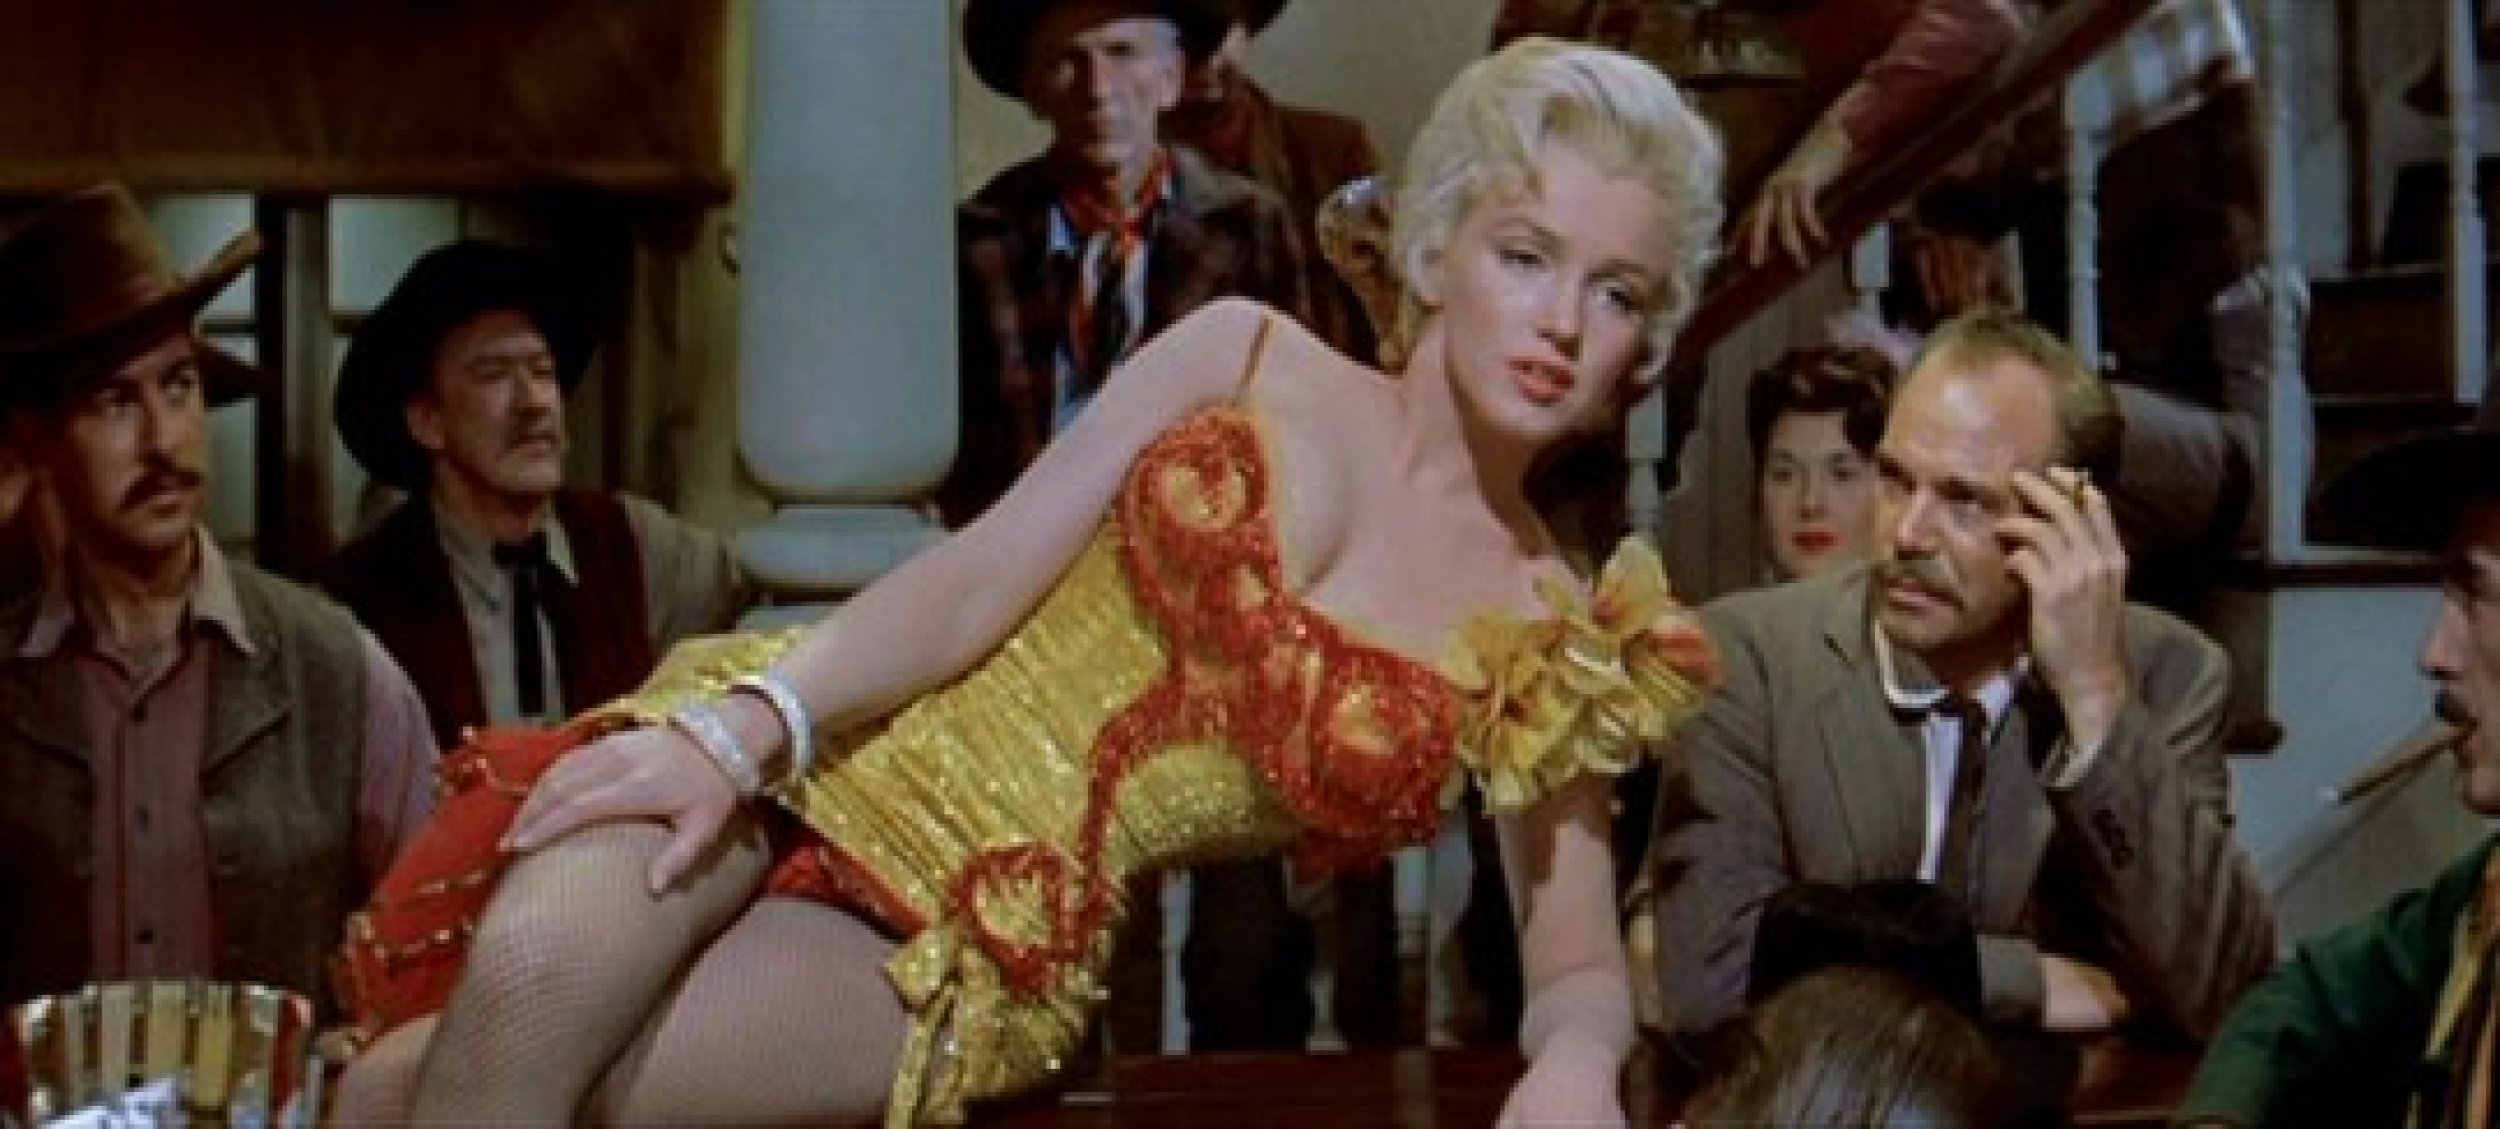 Marilyn Monroe wore this intricate saloon-girl gown in the 1954 film quotRiver of No Return.quot